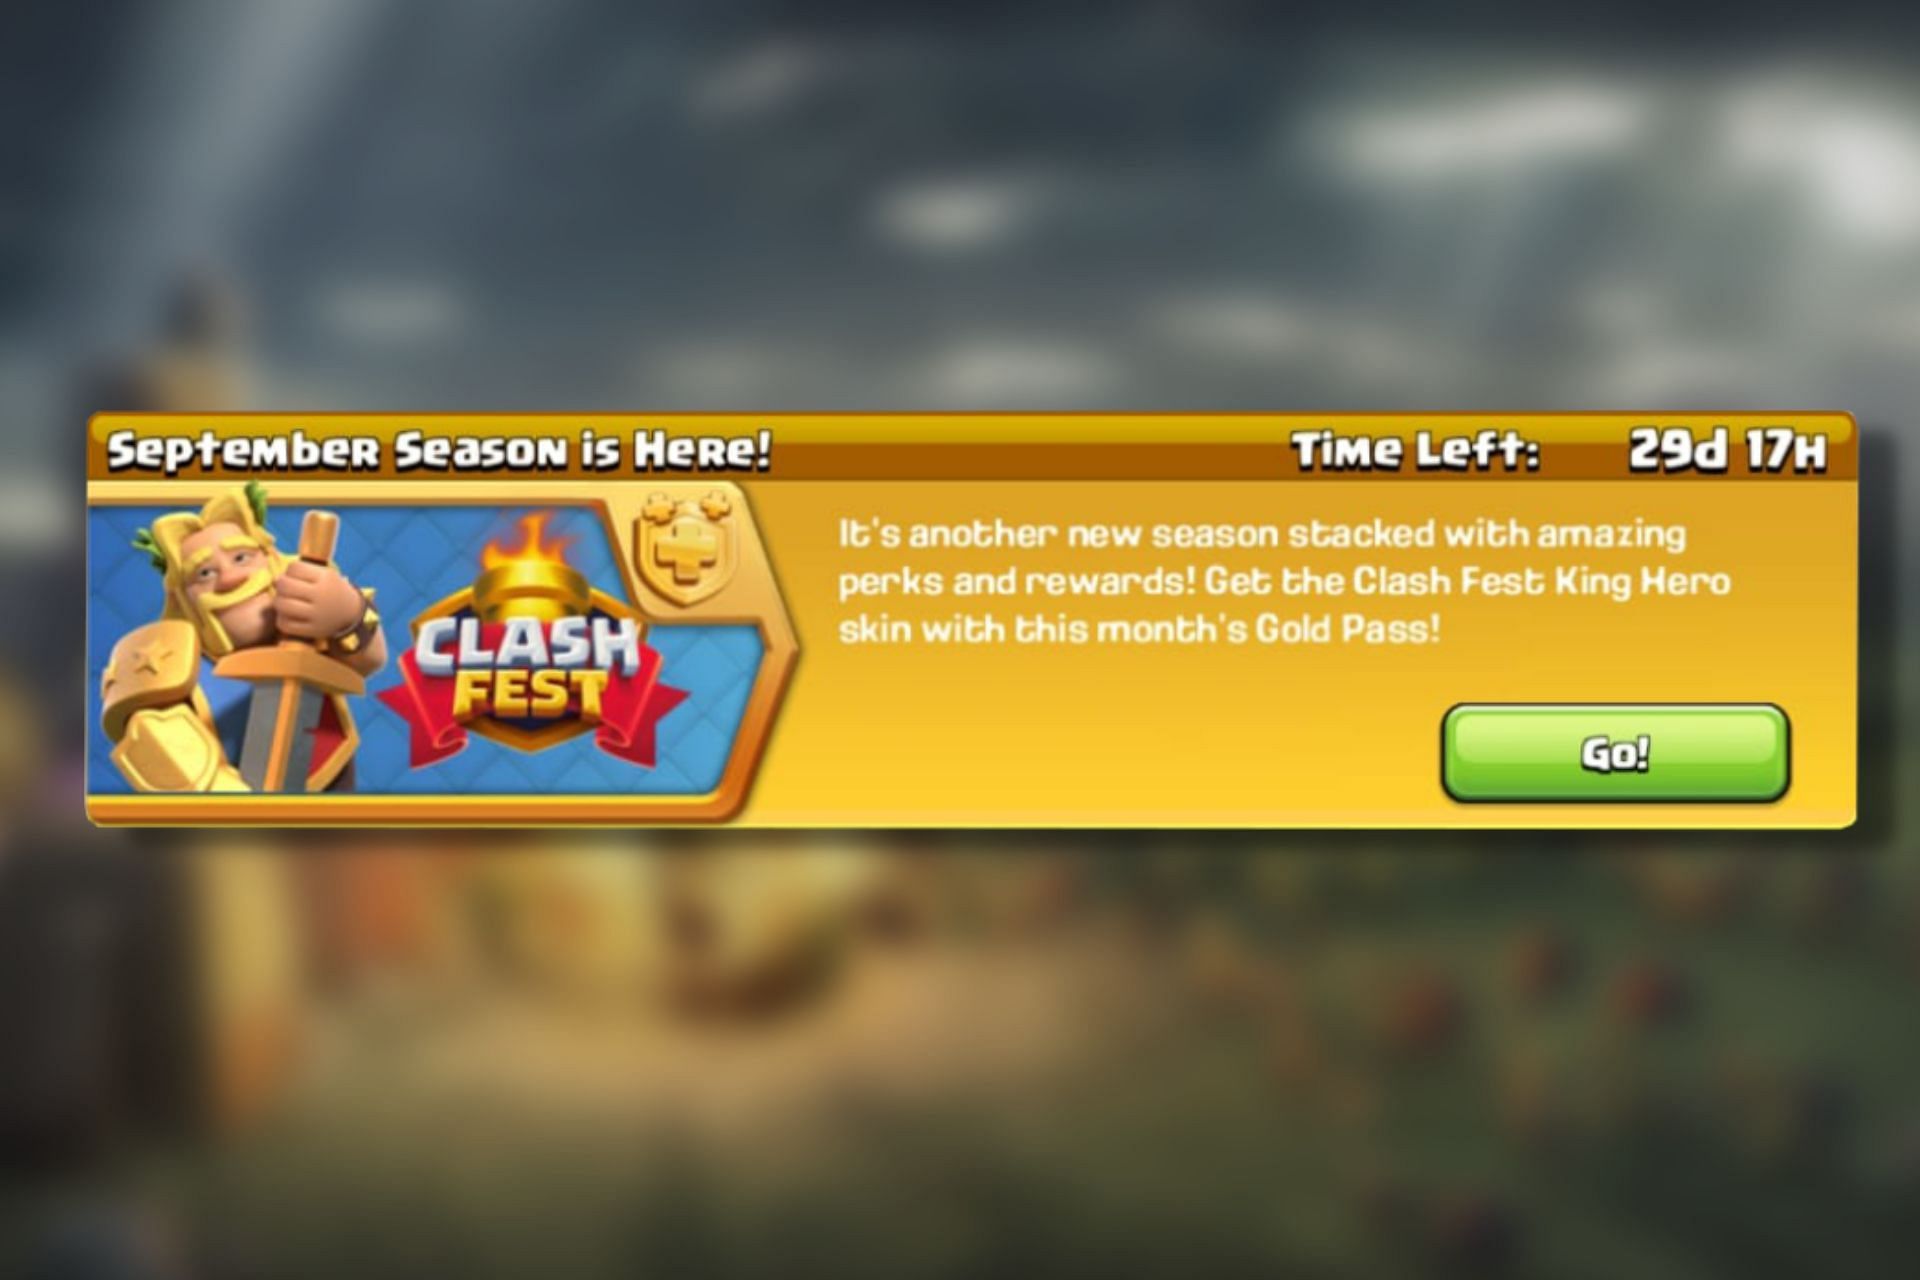 Clash of Clans September Season Challenges detail, rewards, and more